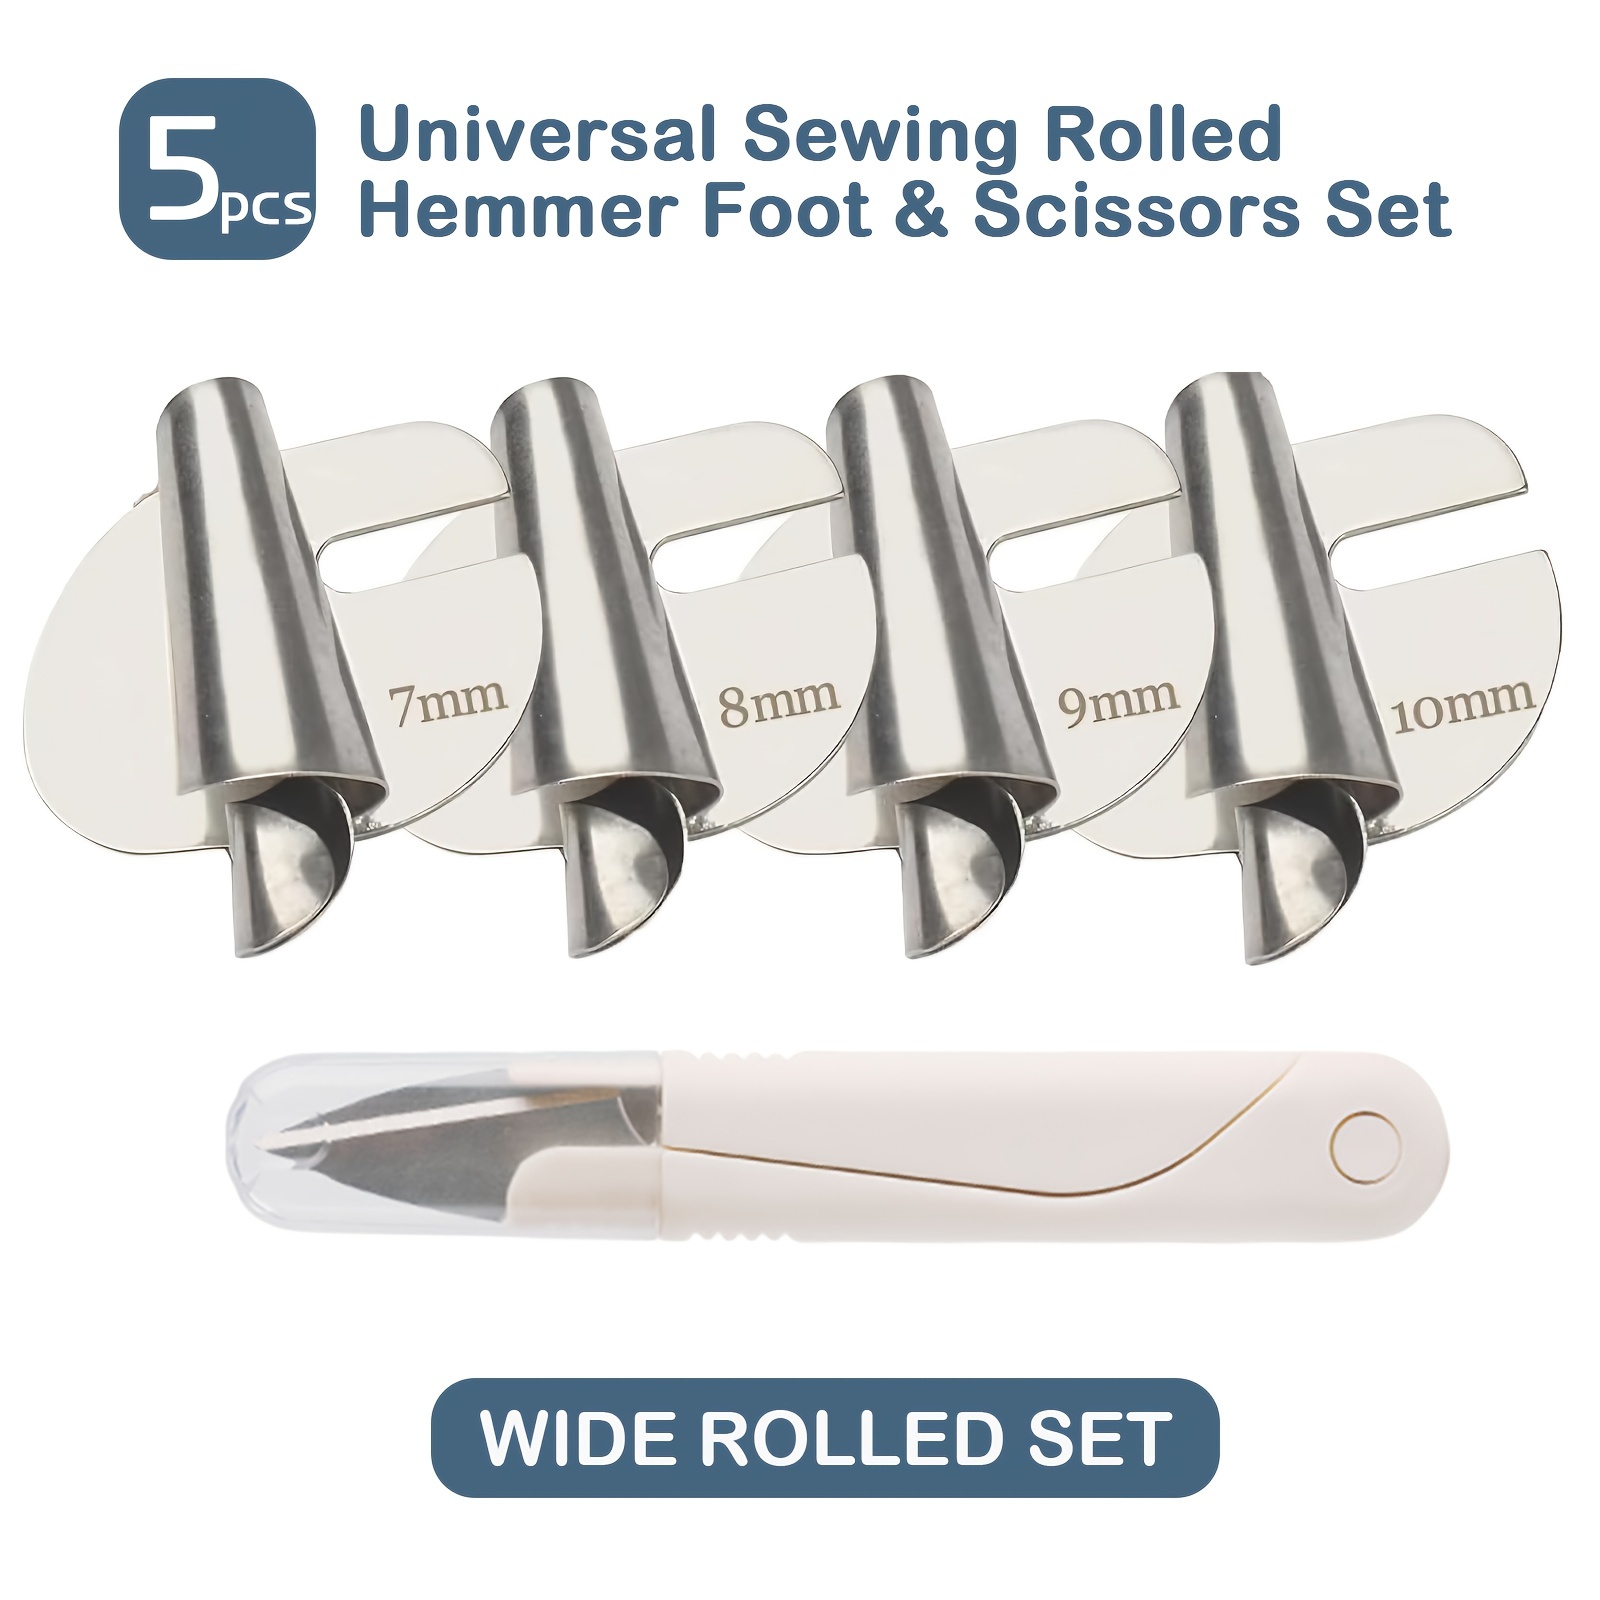 Universal Sewing Rolled Hemmer Foot Set - [7-10mm] - Wide Rolled Hem  Pressure Foot, Sewing Machine Presser Foot Hemmer Foot, Home Industrial  Curved